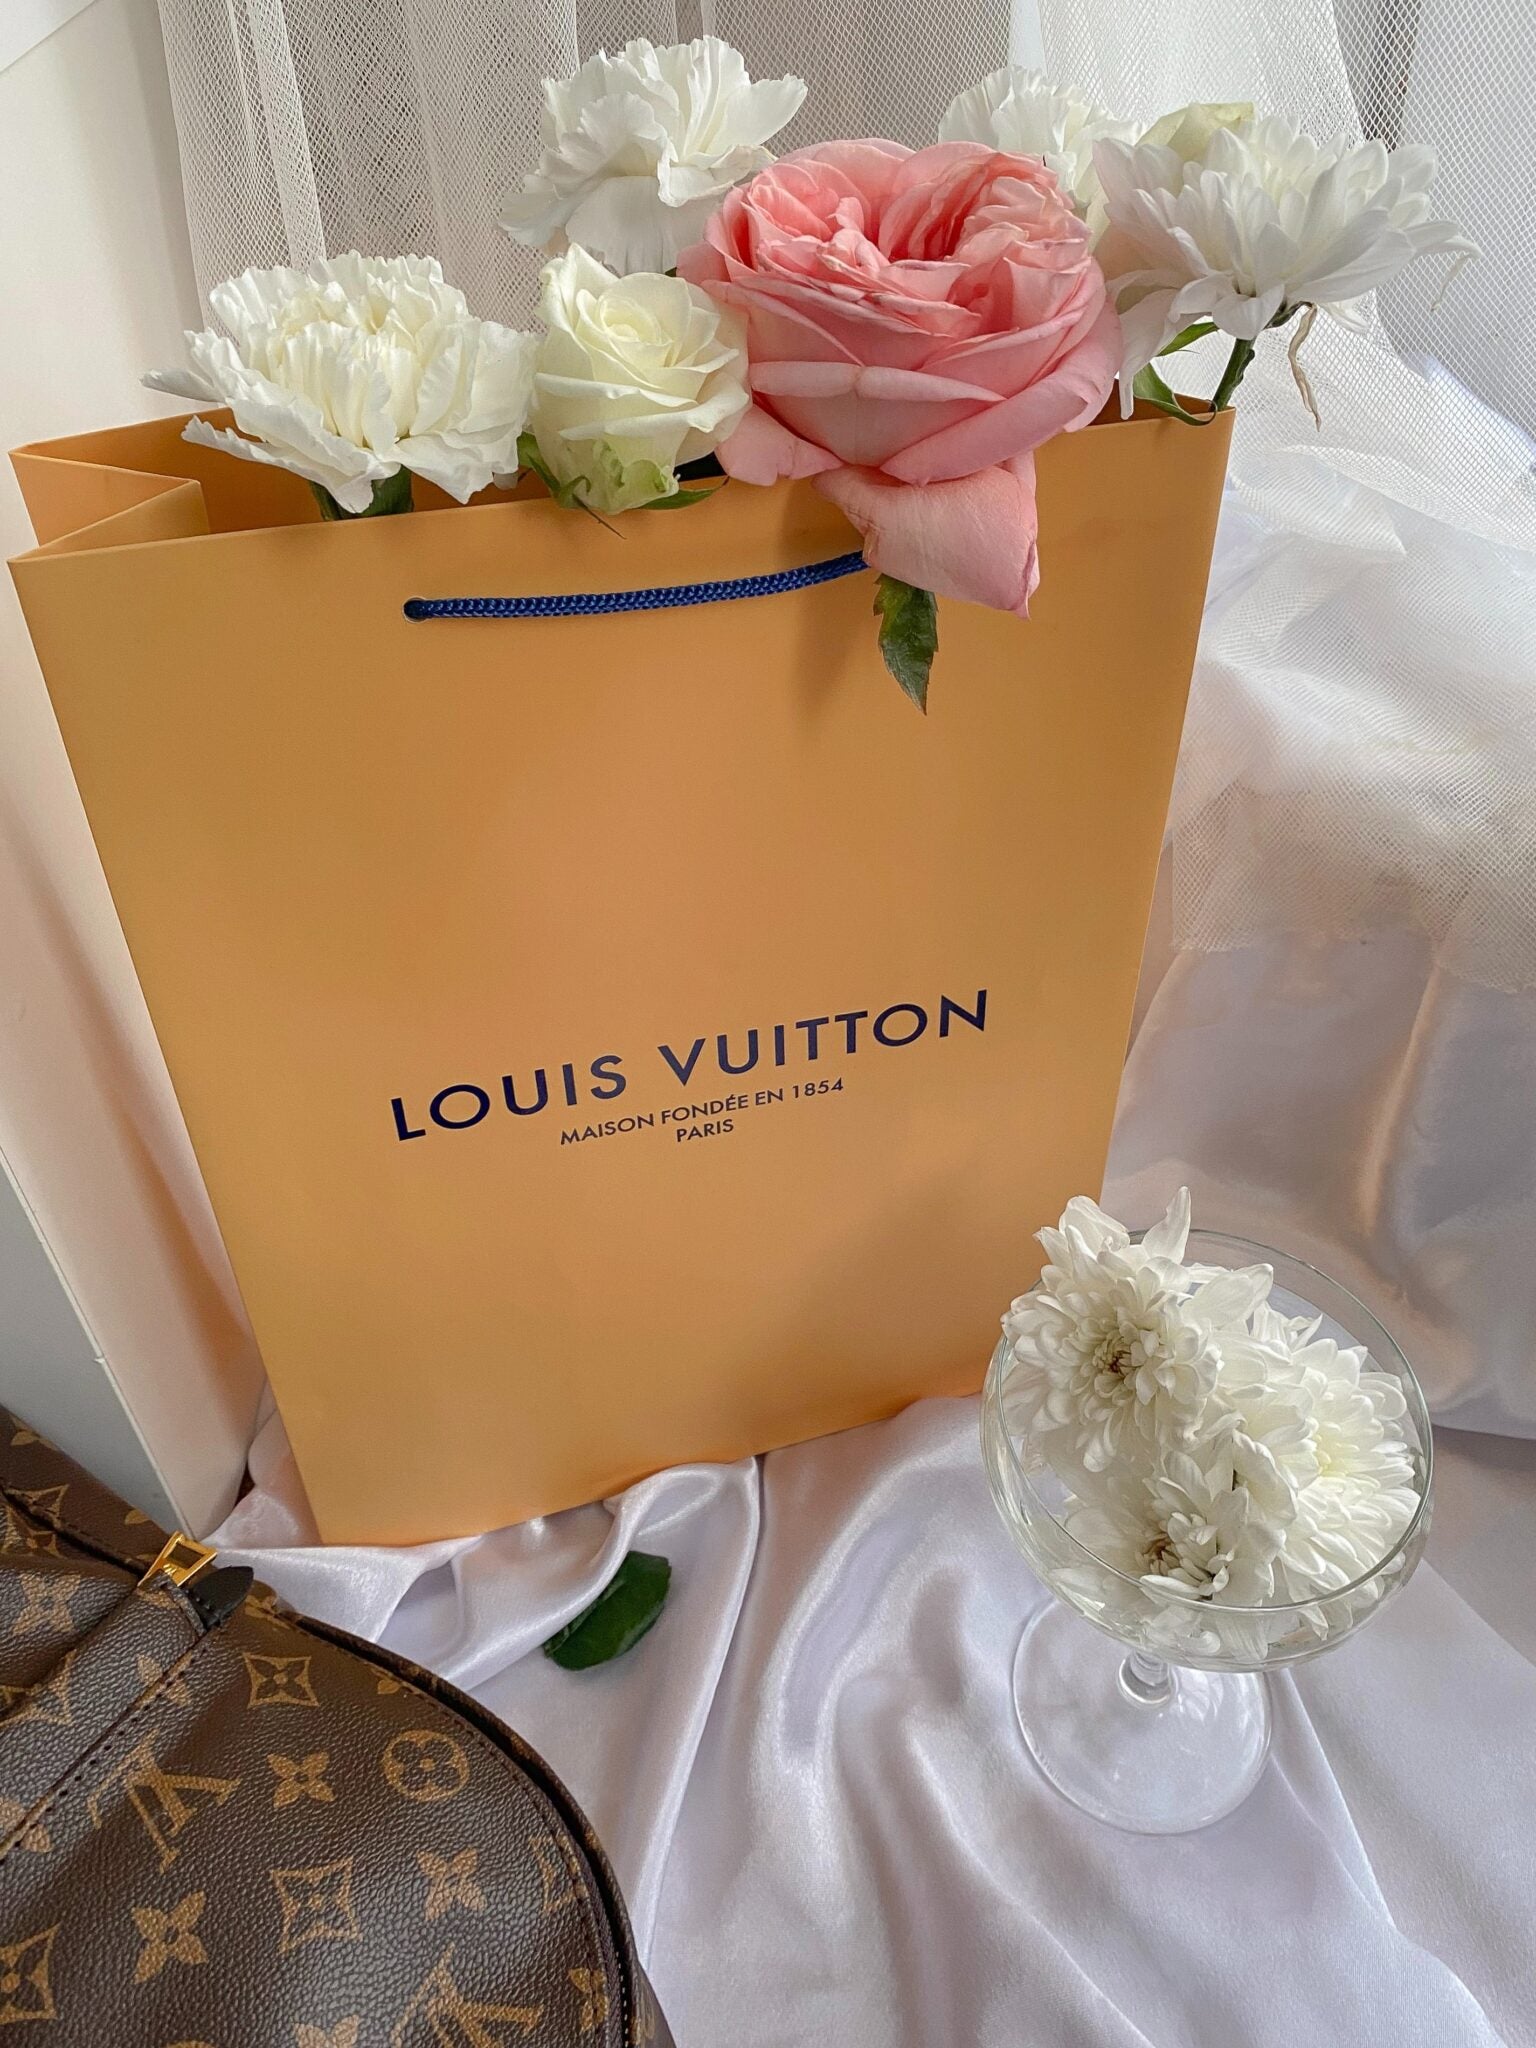 louis vuitton gifts bags